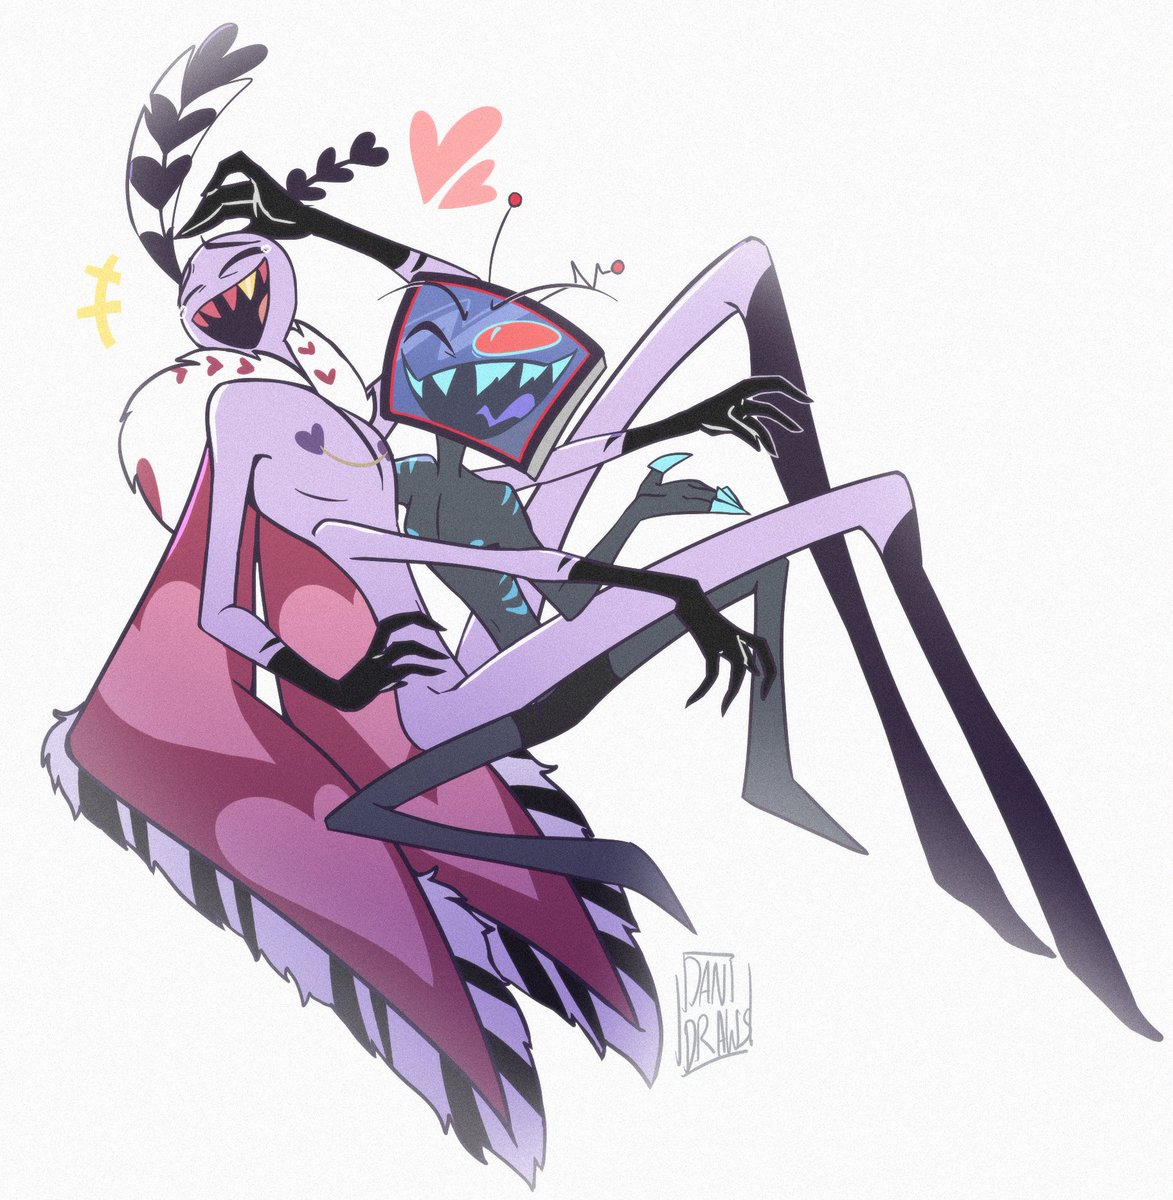 What are they so laughy about? 🤨🫵 #HazbinHotel #VoxVal #Staticmoth